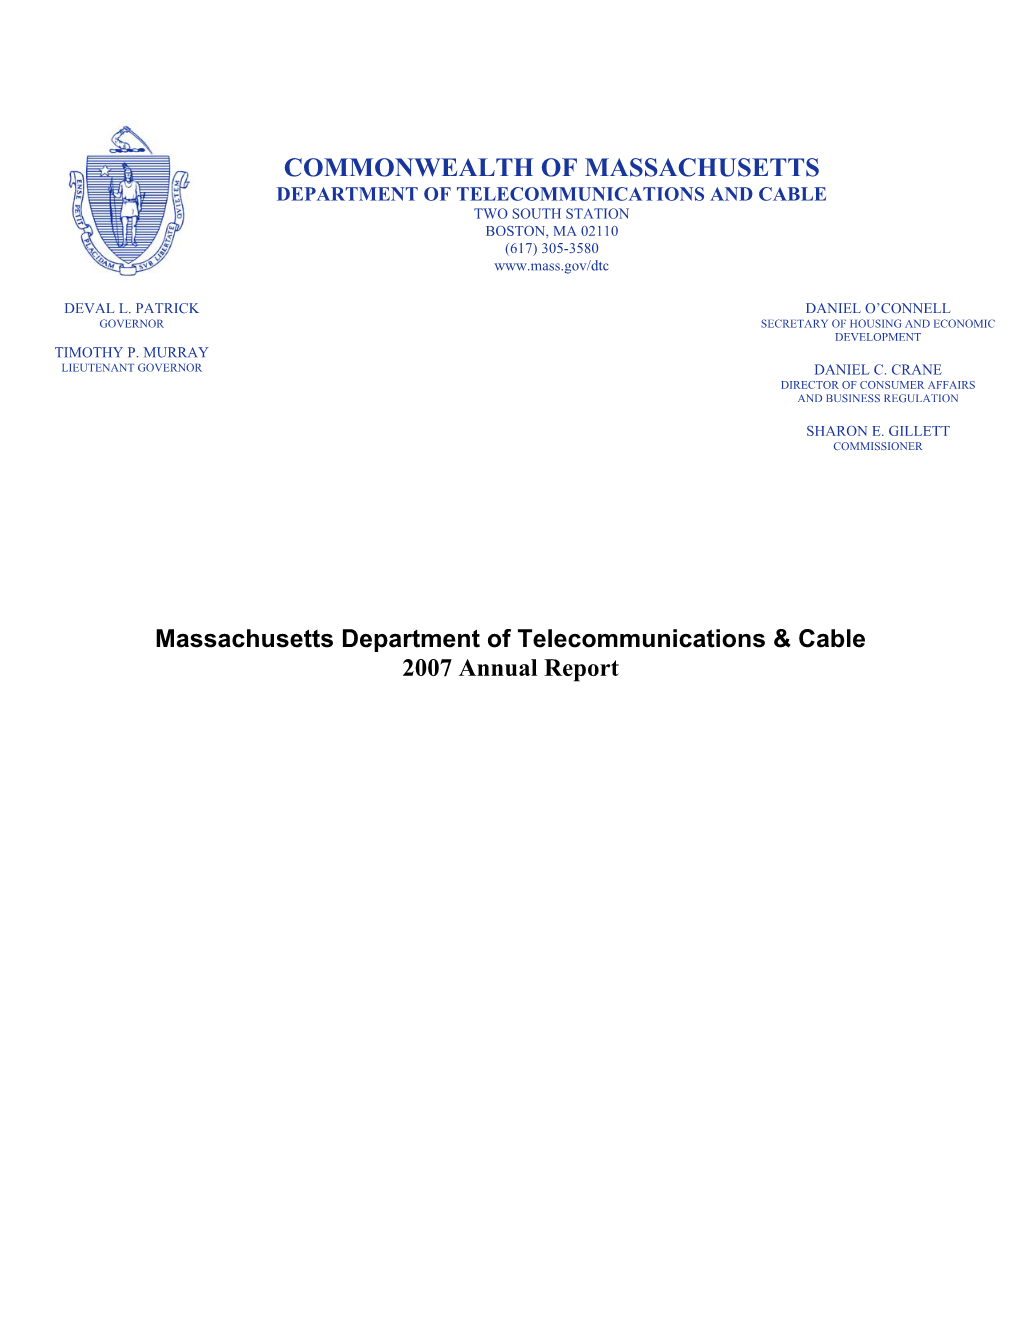 Commonwealth of Massachusetts Department of Telecommunications and Cable Two South Station Boston, Ma 02110 (617) 305-3580